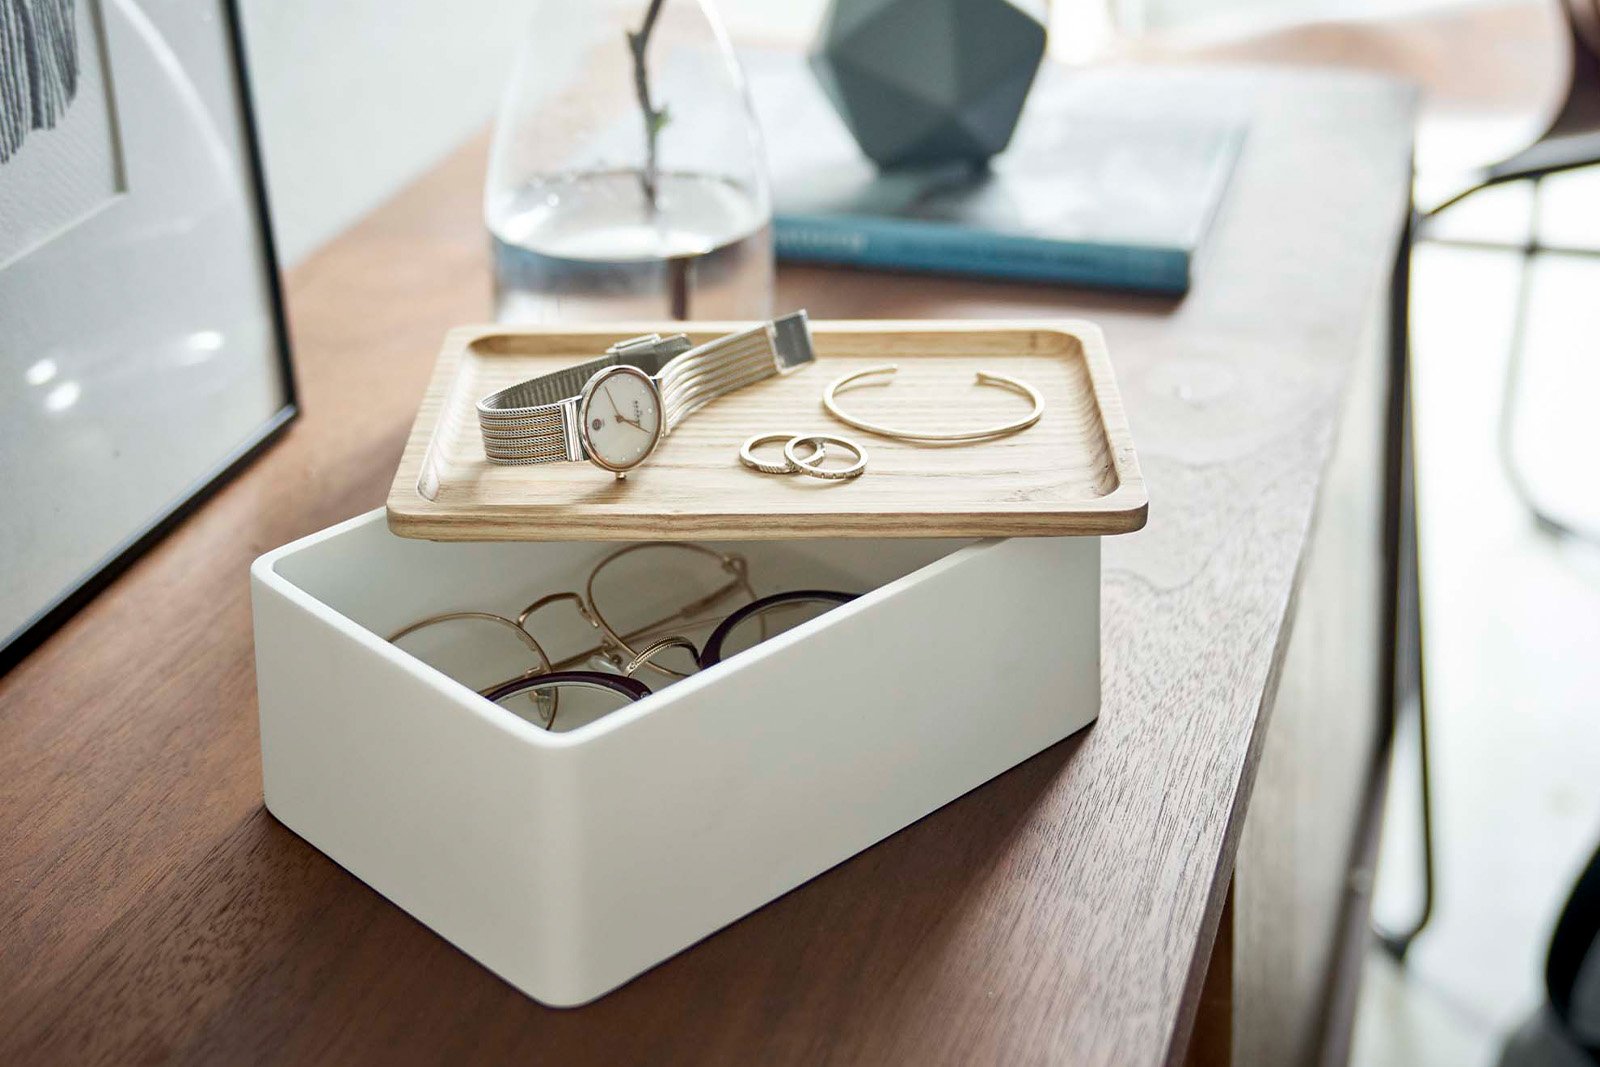 Yamazaki Home white Accessory Box holding glasses and a watch and jewelry on a counter.